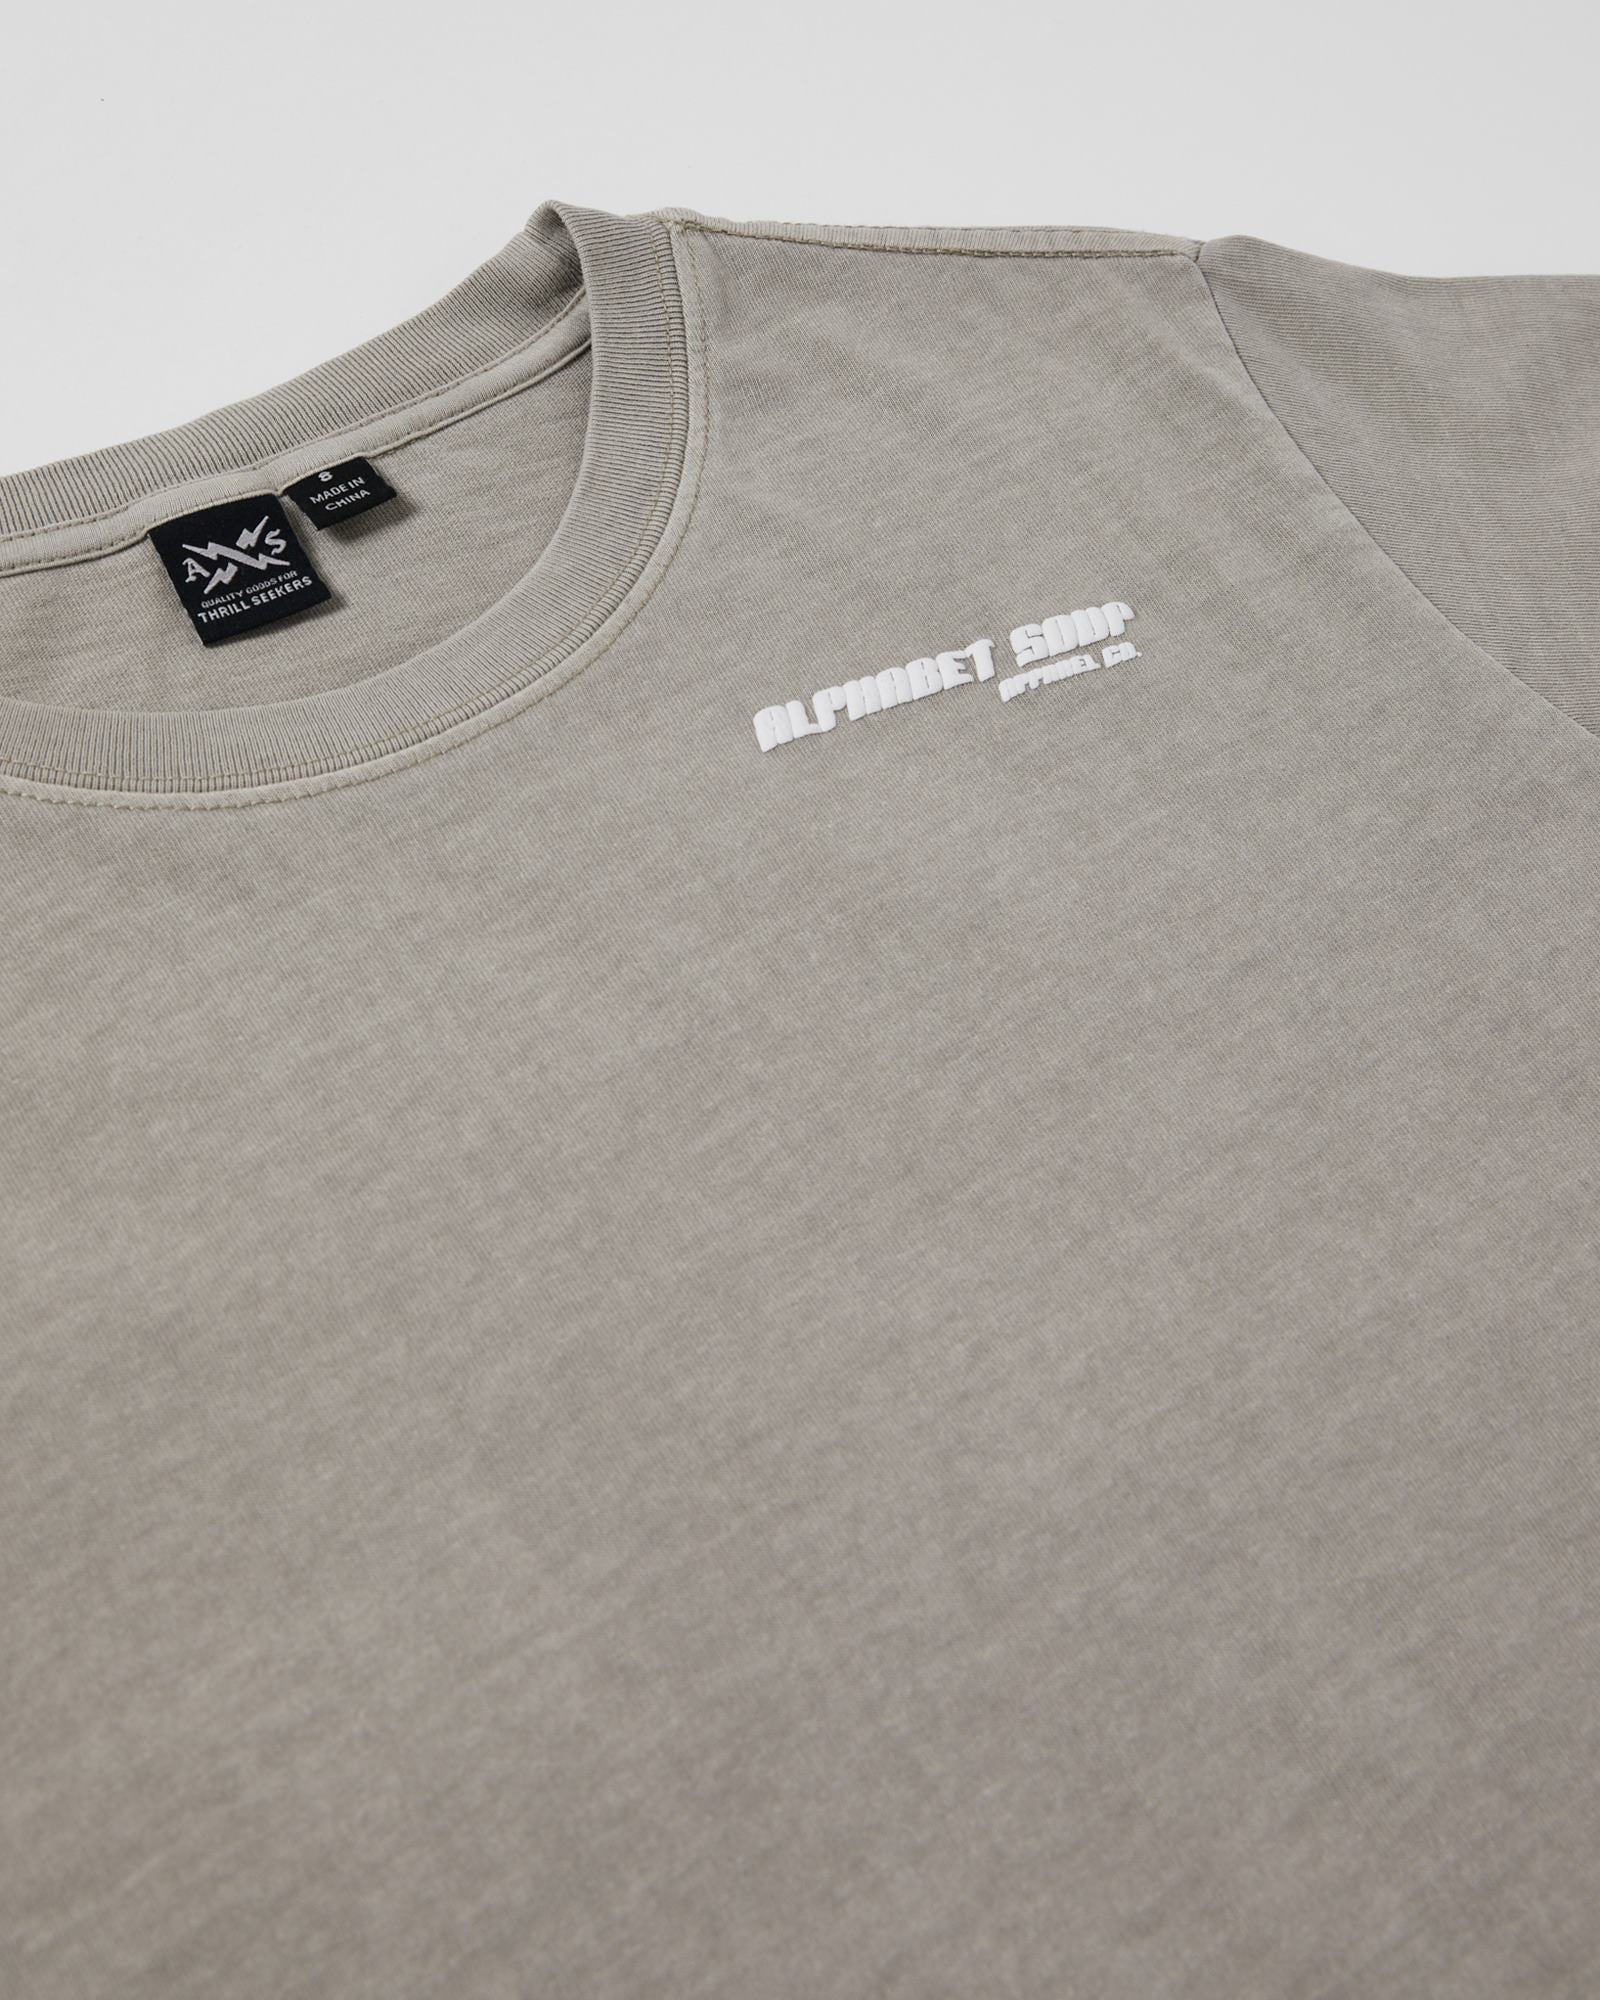 Expertly crafted using 100% cotton jersey in a unique concrete colorway, this Kids San Clemente Tee boasts a vintage garment dye wash and puff logo print on the chest and back.